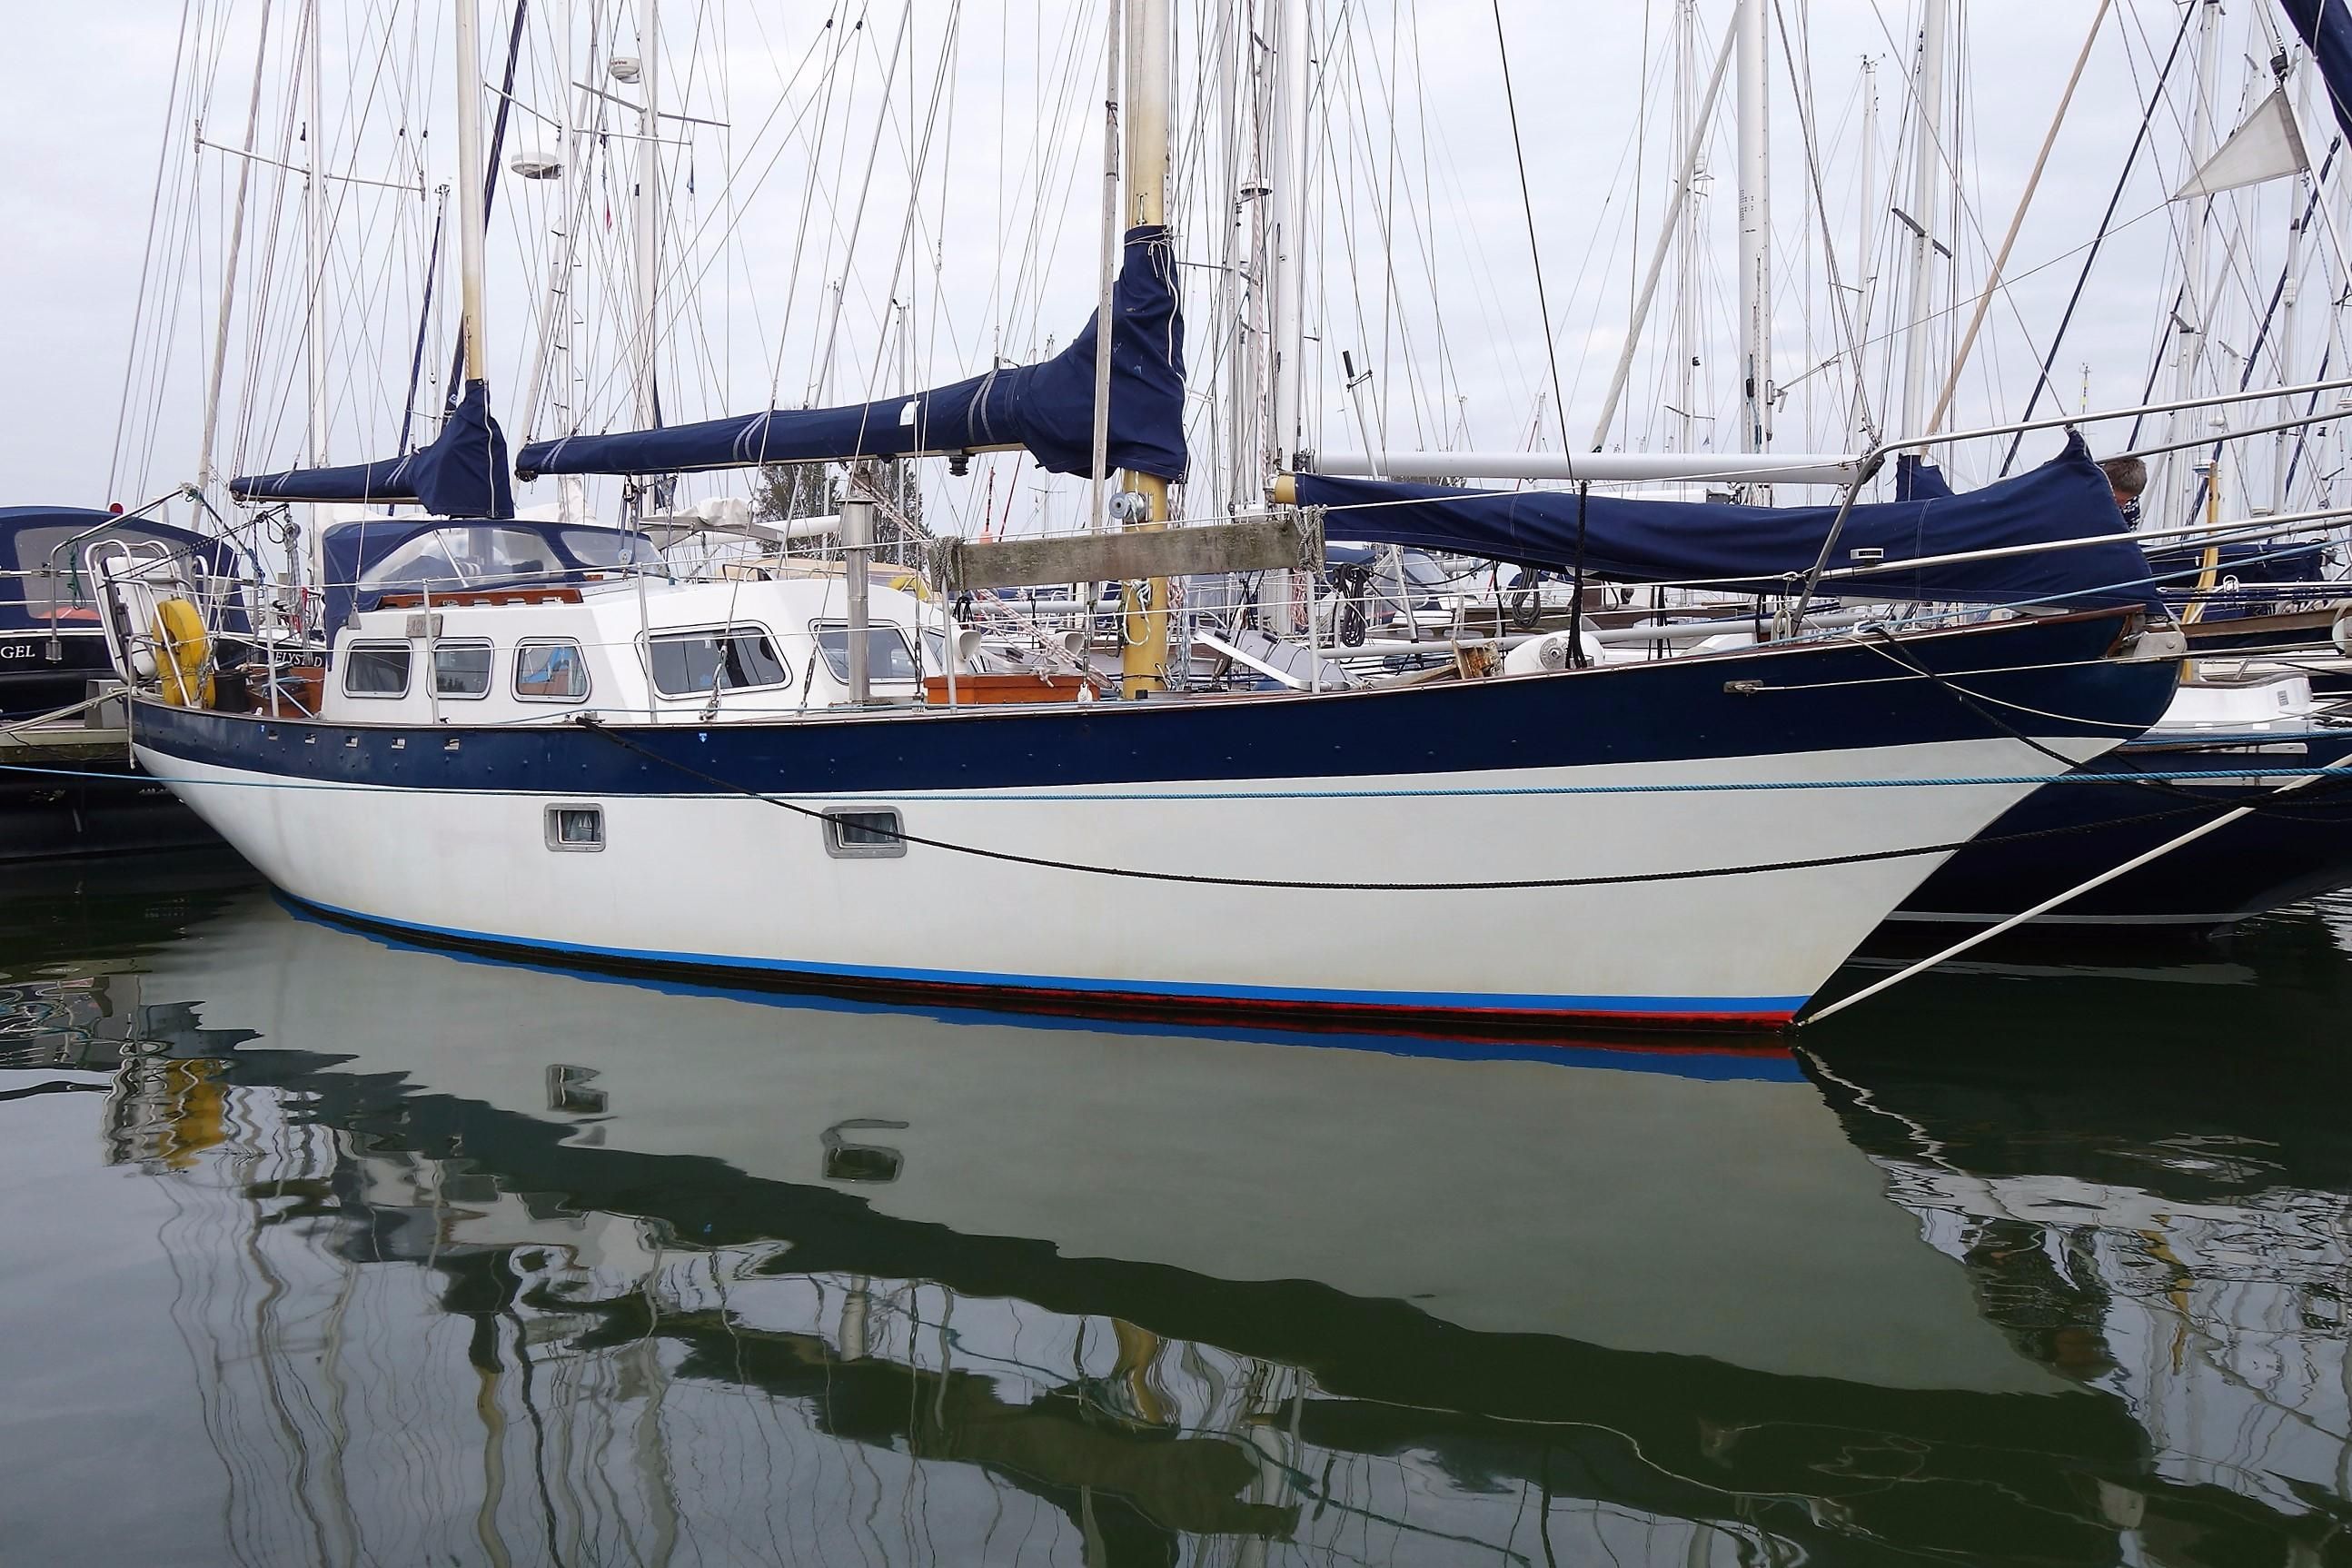 1974 Endurance 35 Ketch Sail Boat For Sale - www 